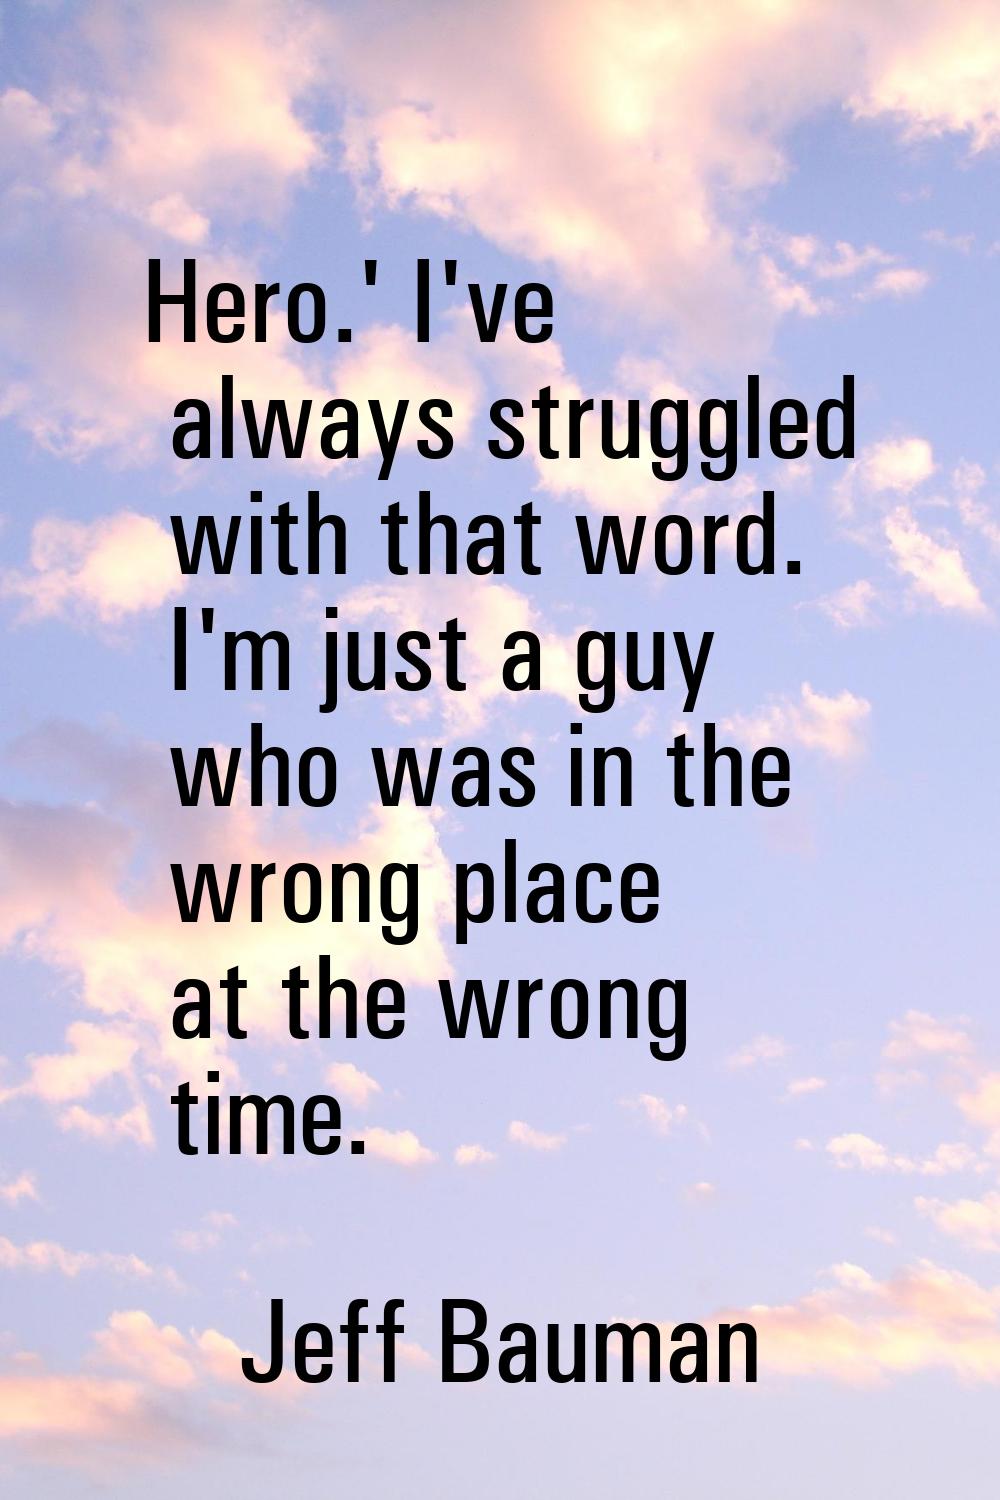 Hero.' I've always struggled with that word. I'm just a guy who was in the wrong place at the wrong